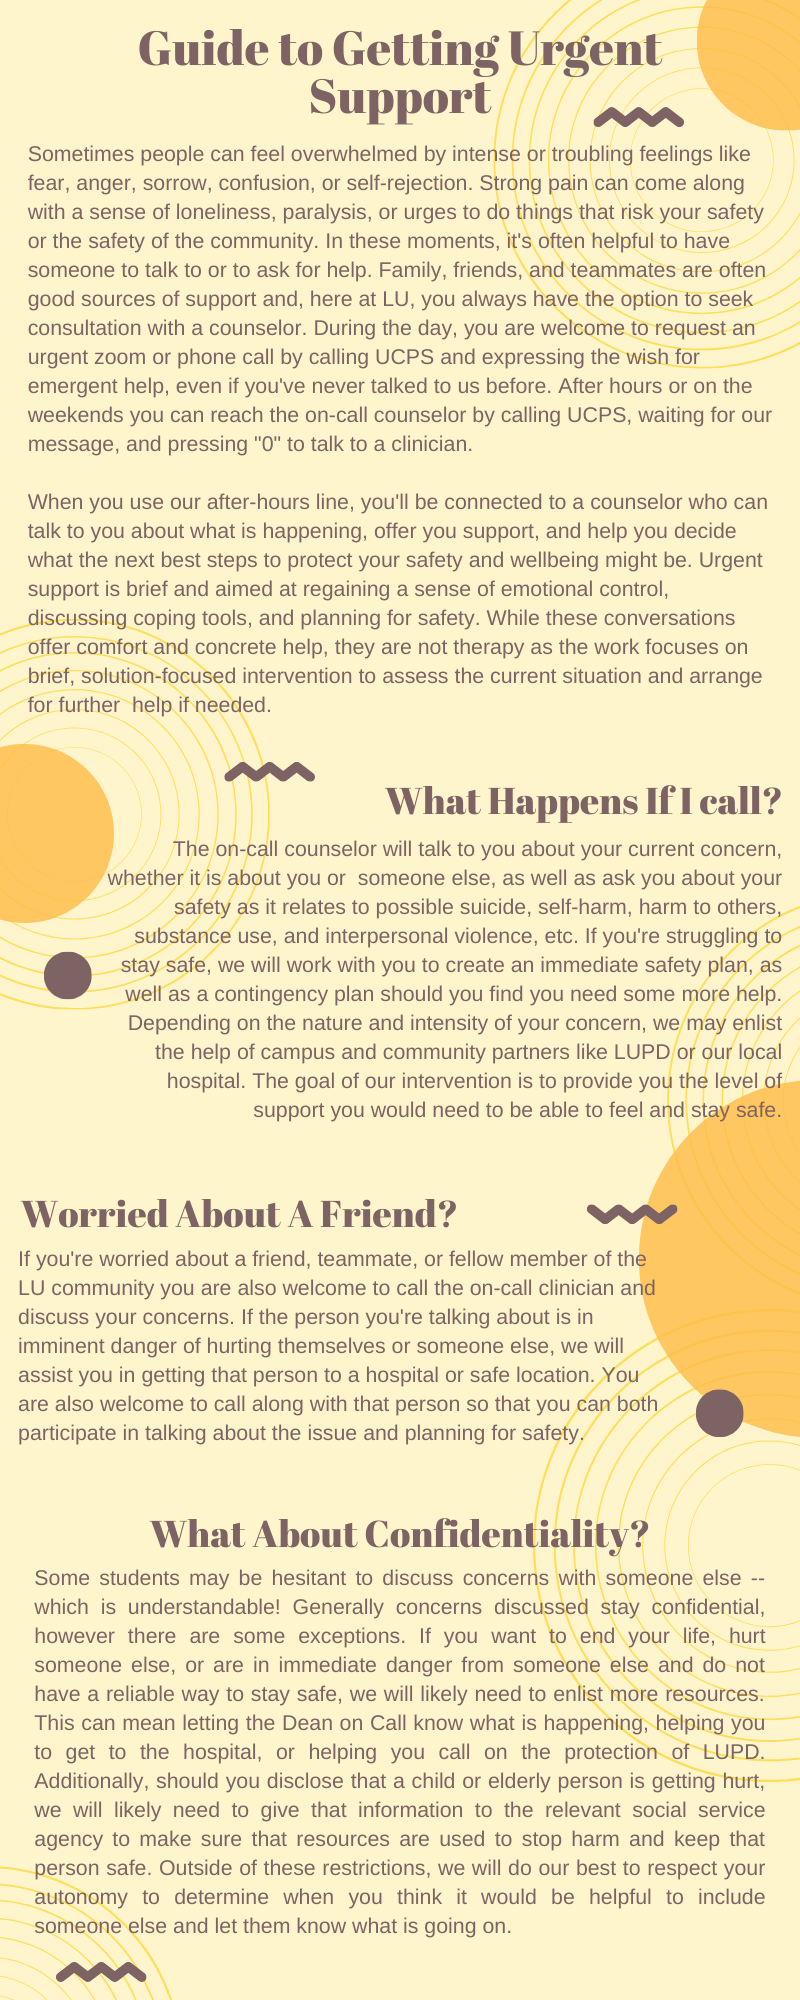 Graphic about what to expect from the on call counselor.